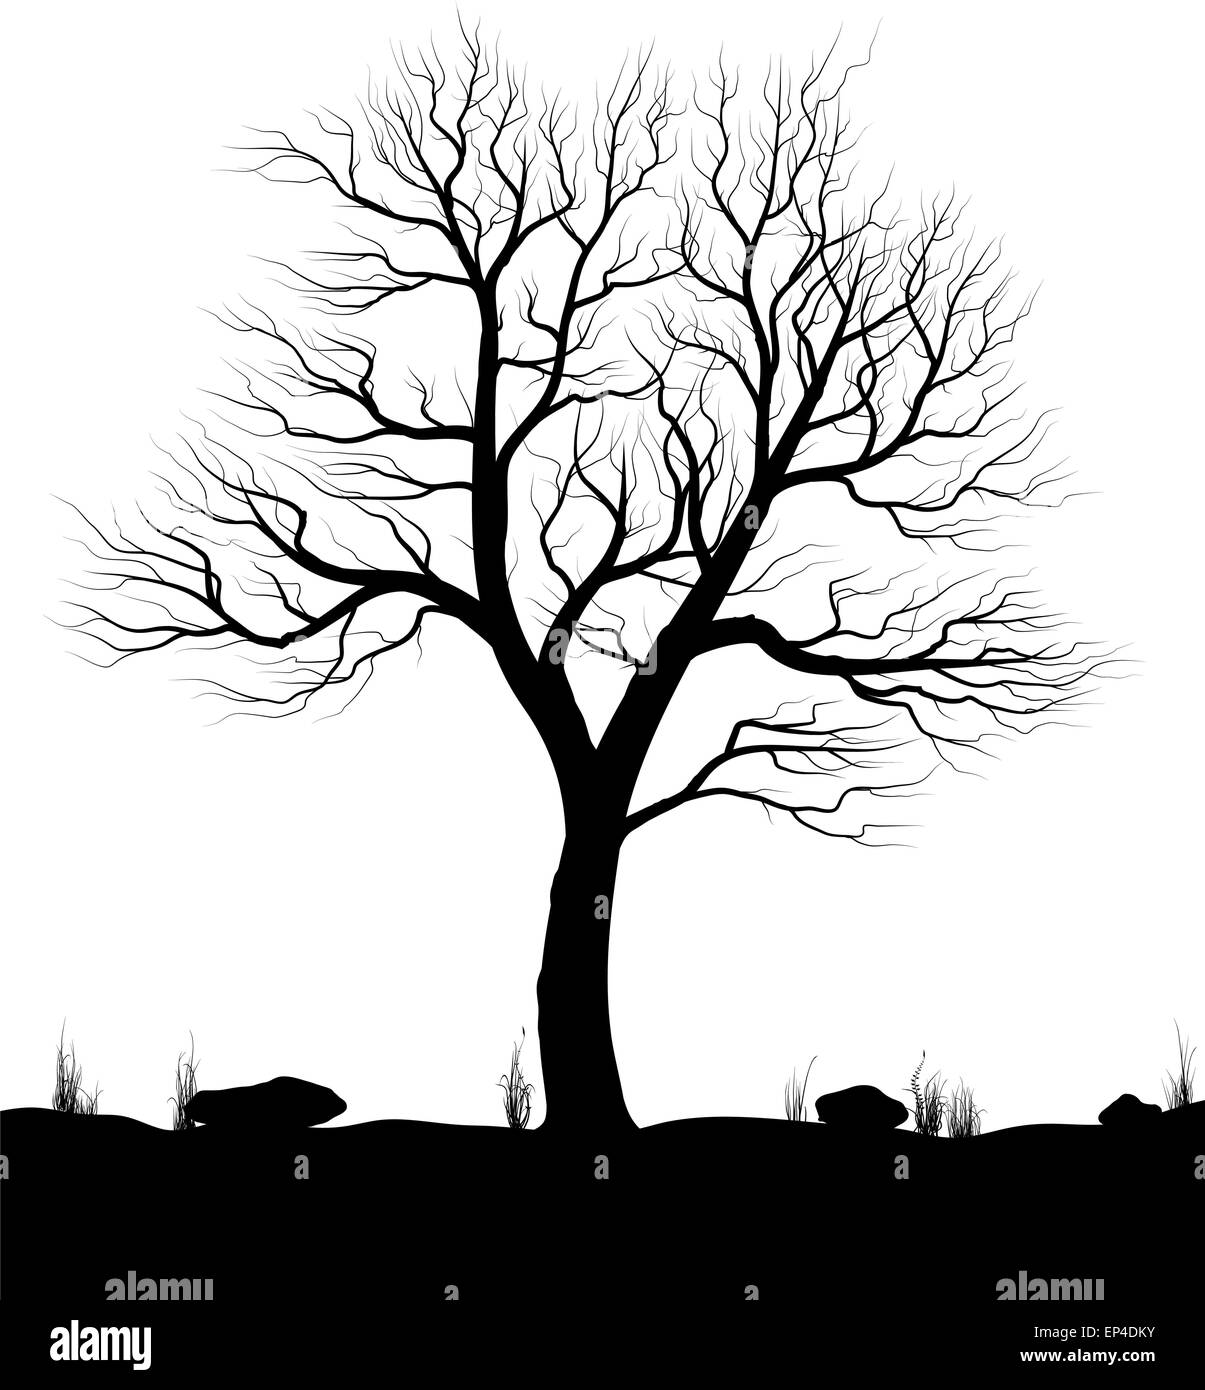 Landscape with old tree and grass over white background. Black and white vector illustration. Stock Vector